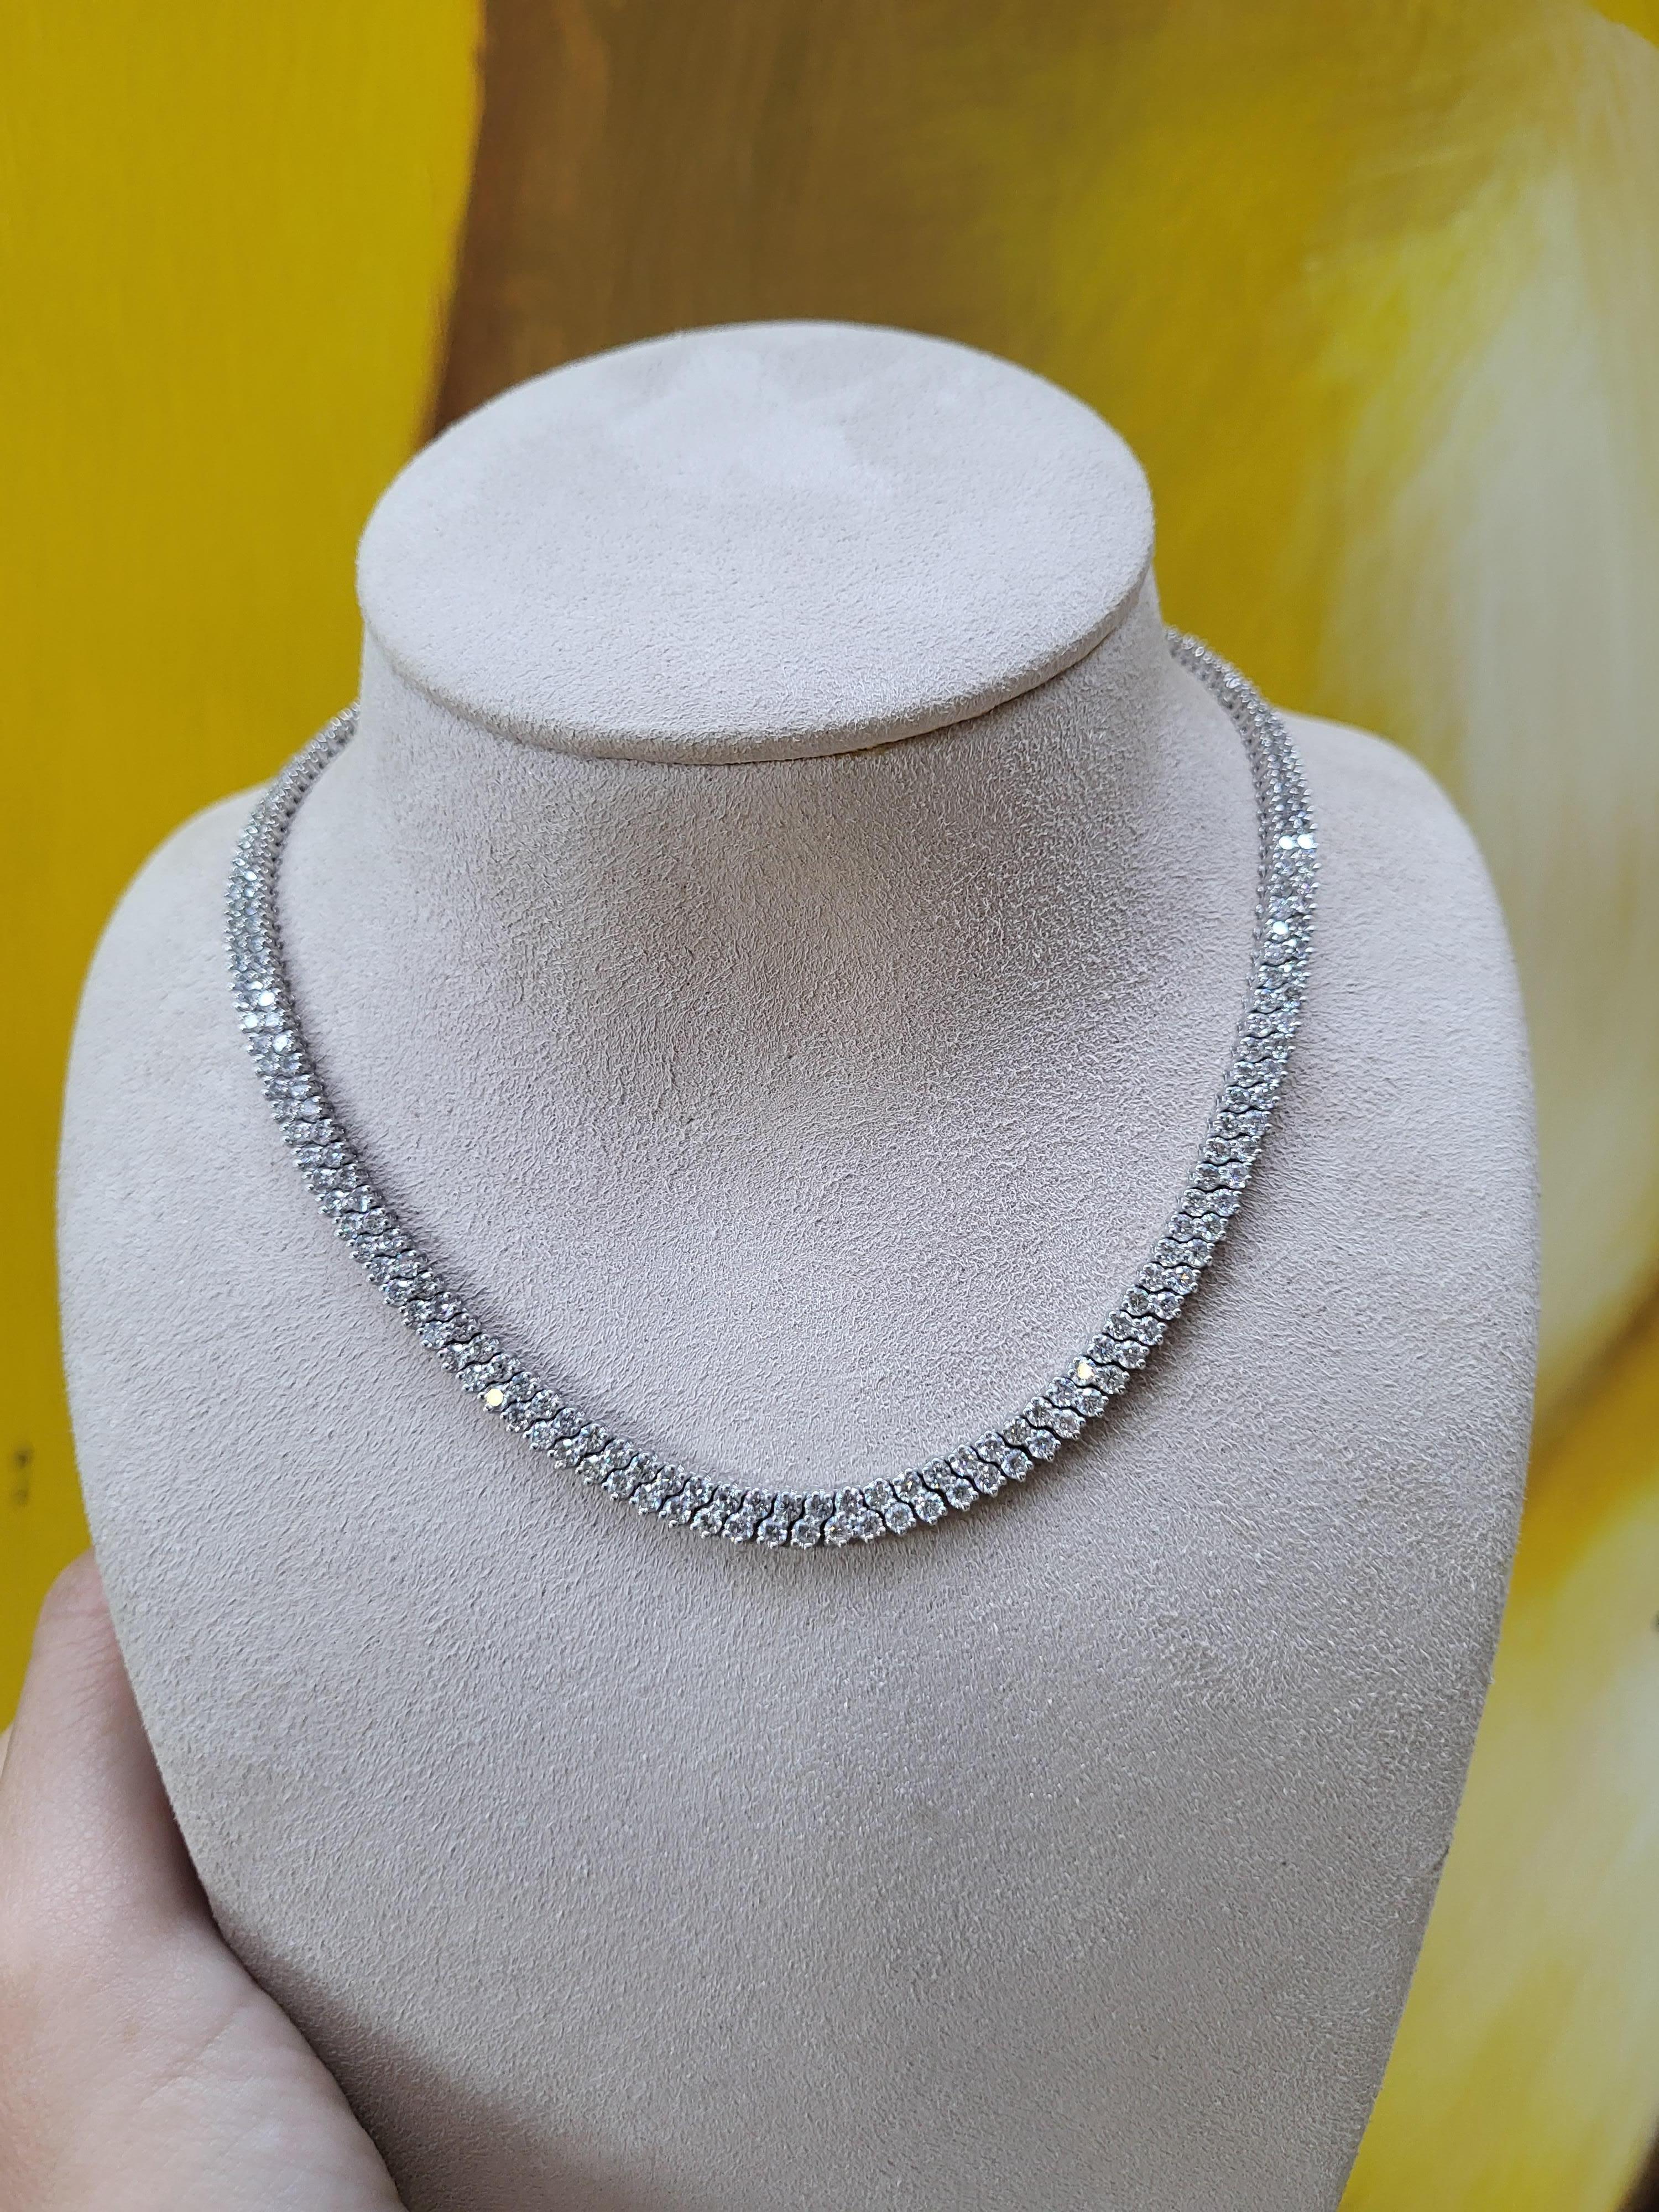 14 Karat White Gold 10.13 Carat Total Weight Diamond Two Row Choker Necklace For Sale 2